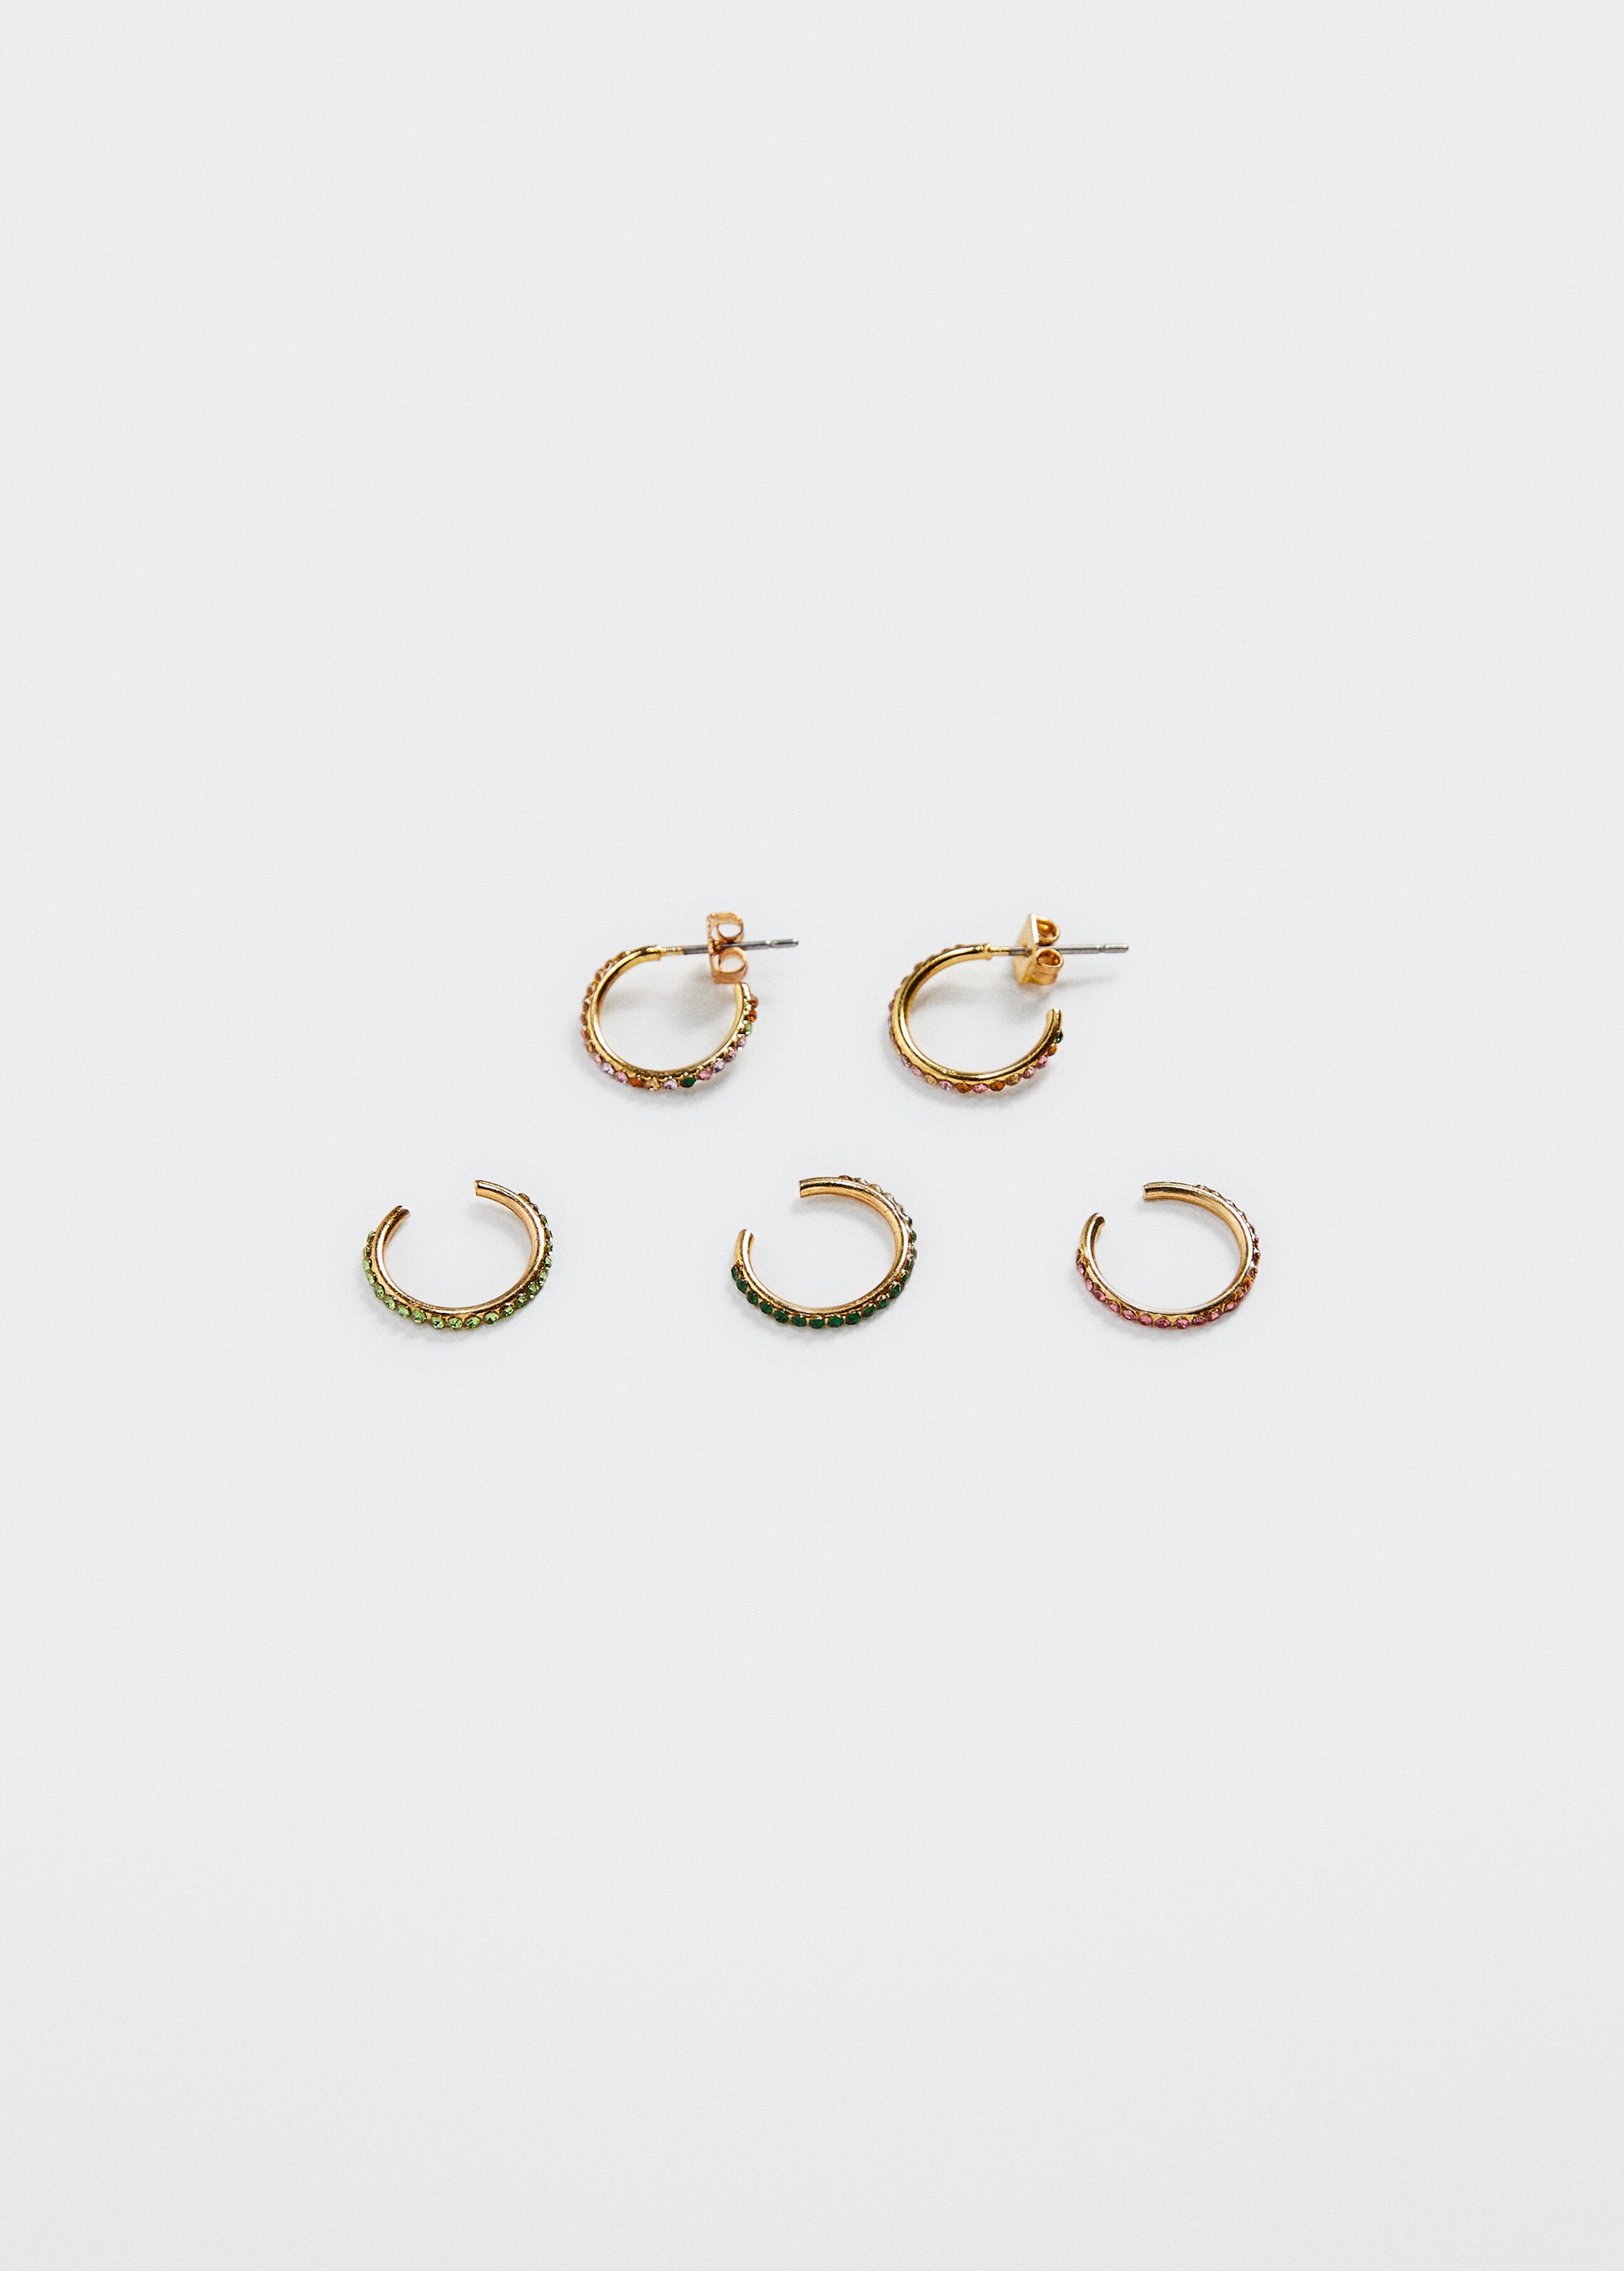 Ear cuff and earring set - Article without model